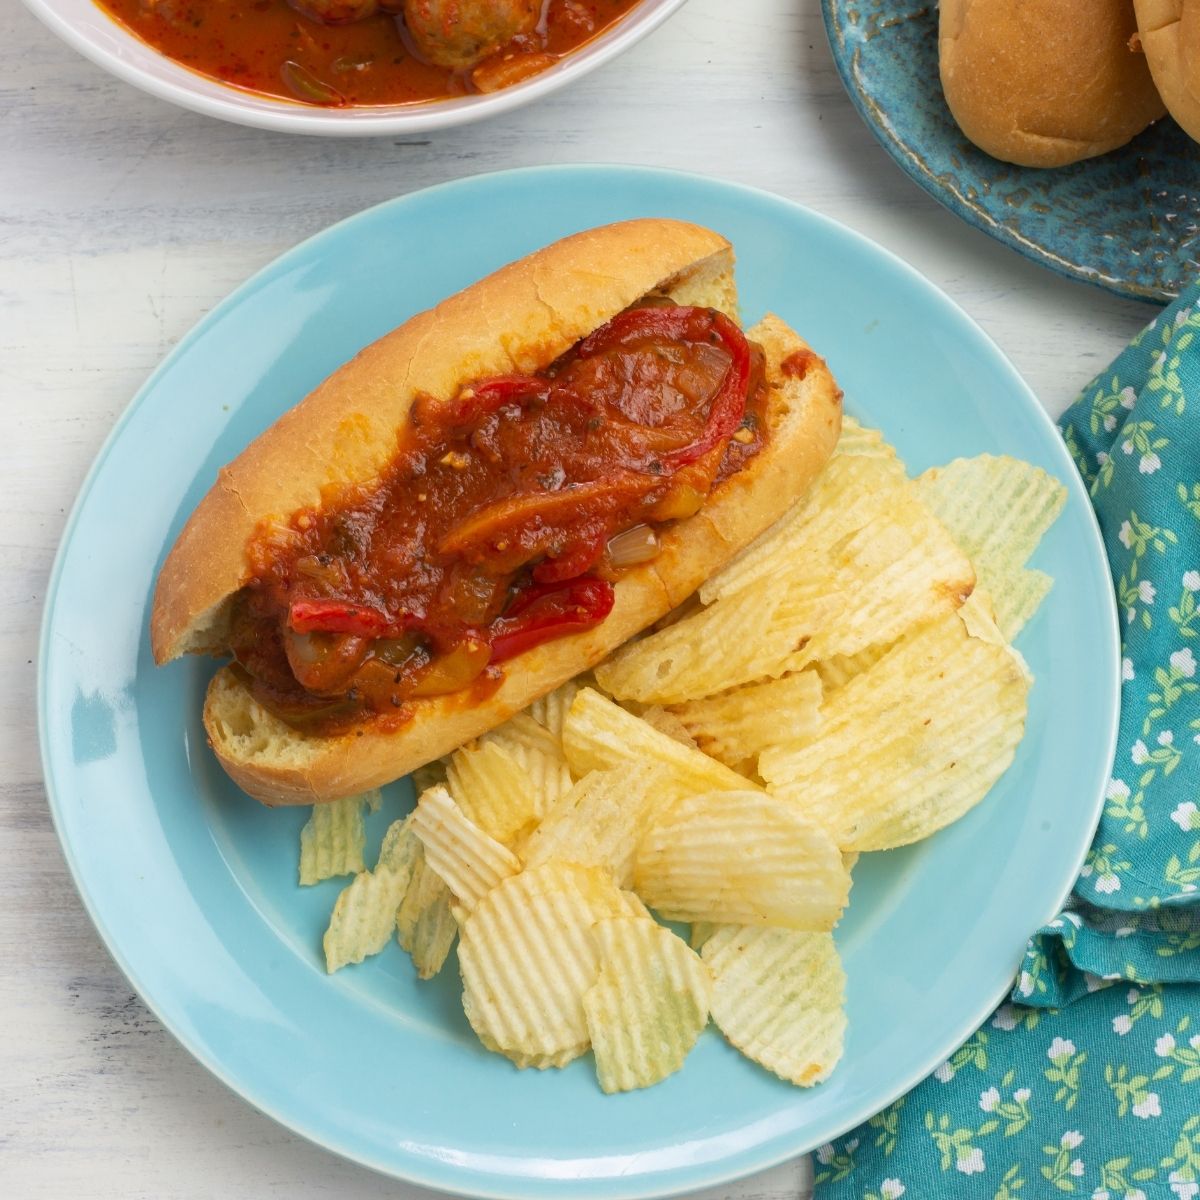 Sausage and peppers cooked in sauce on a bun served with chips.